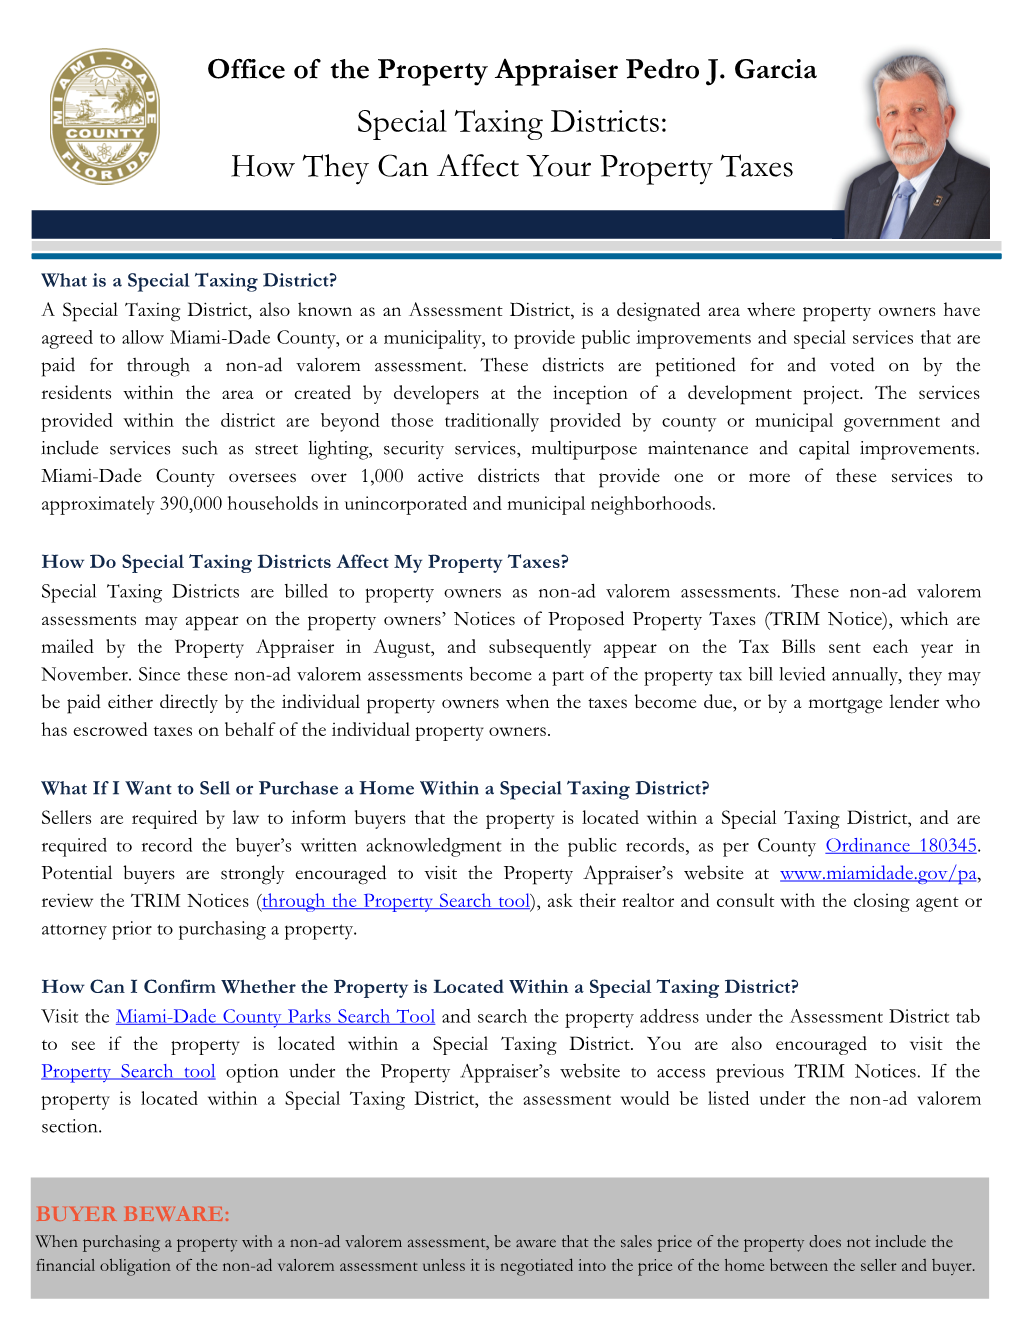 Special Taxing Districts: How They Can Affect Your Property Taxes